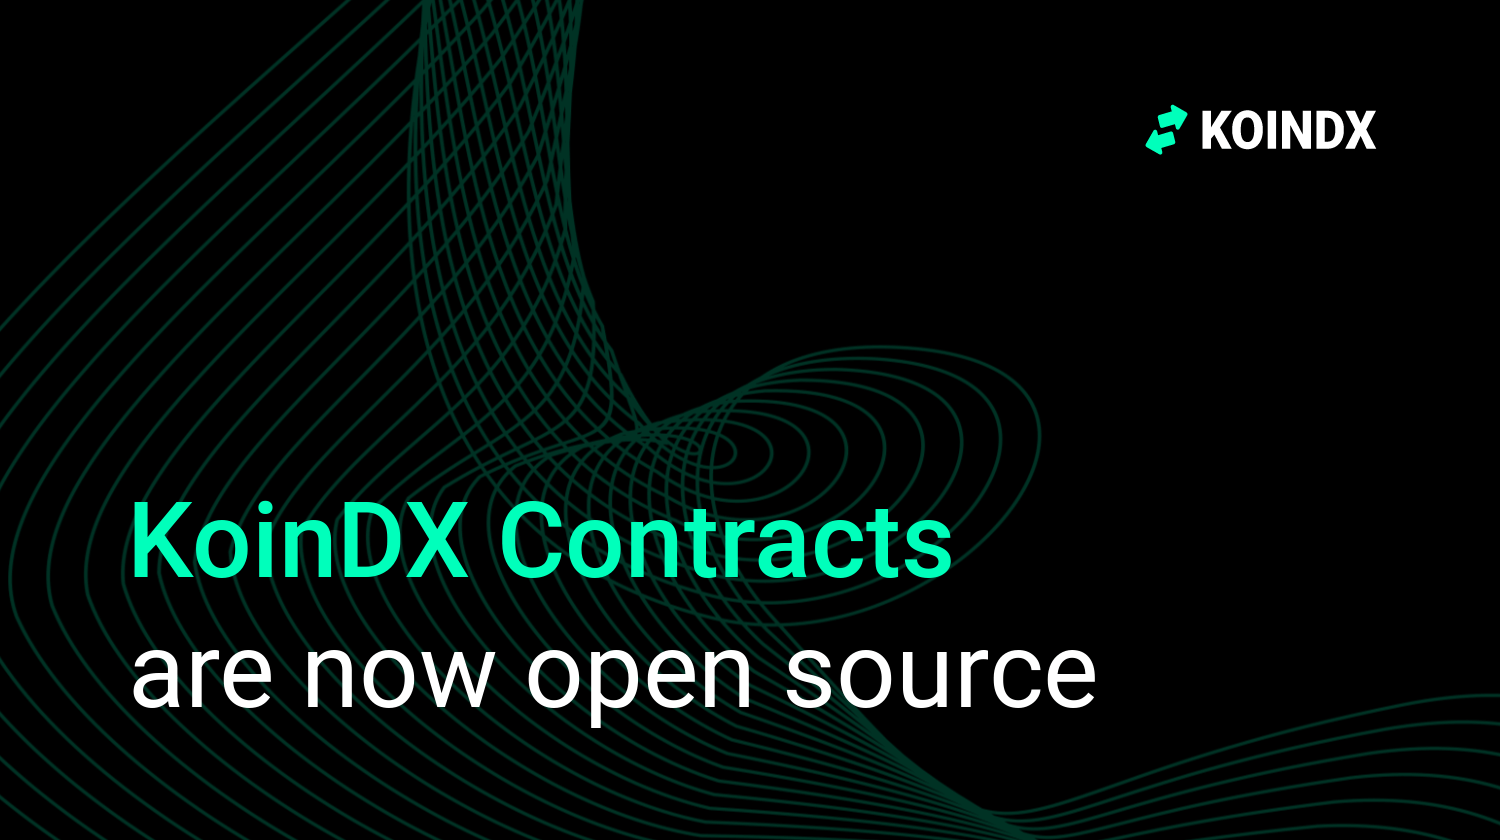 KoinDX contracts are now open source